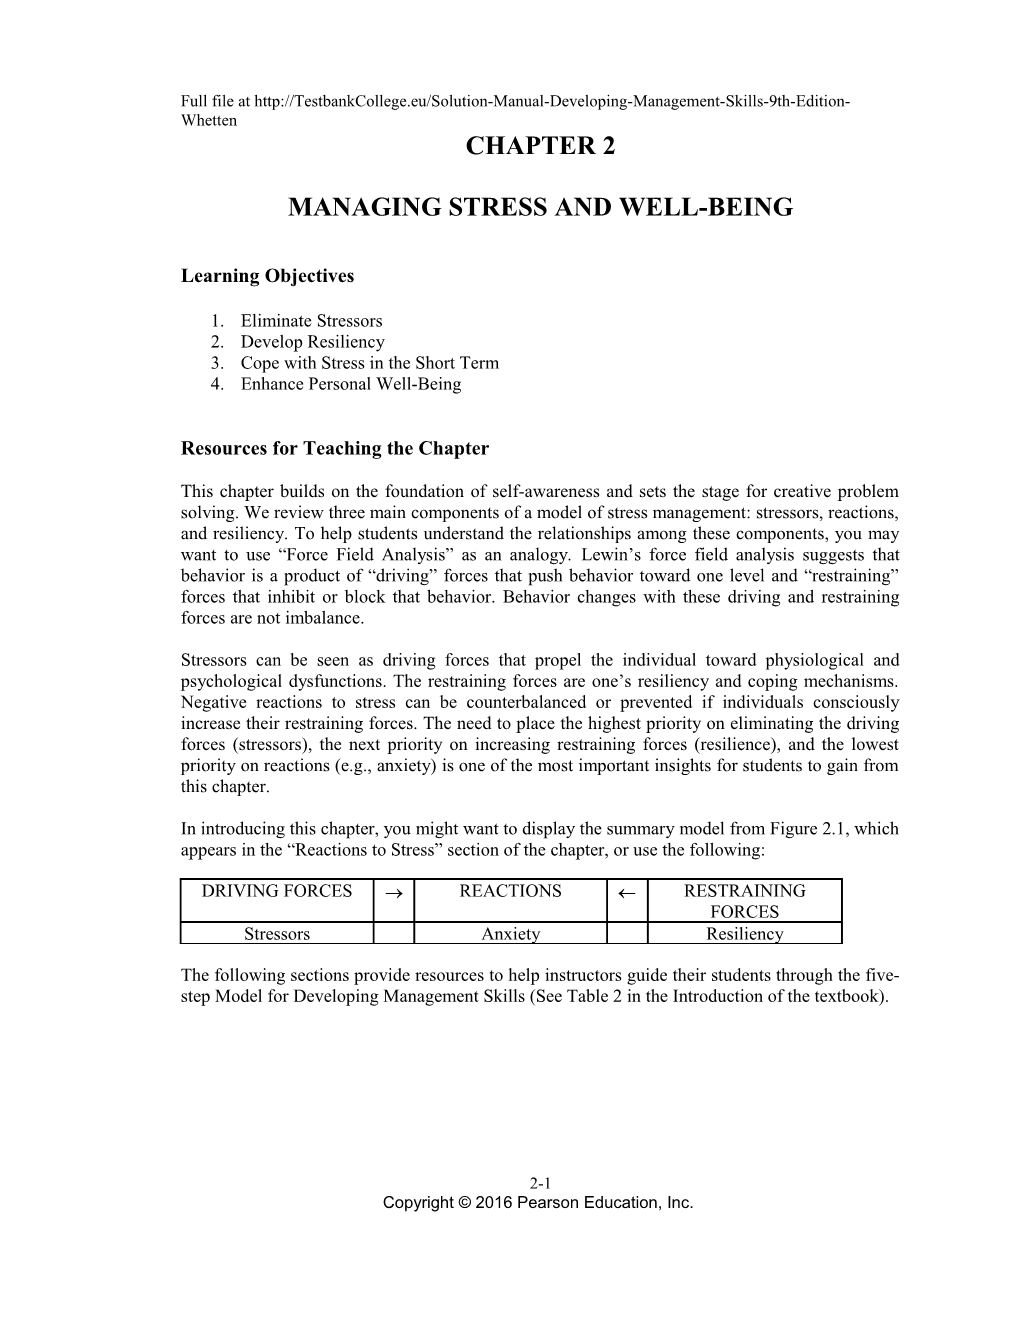 Managing Stress and Well-Being